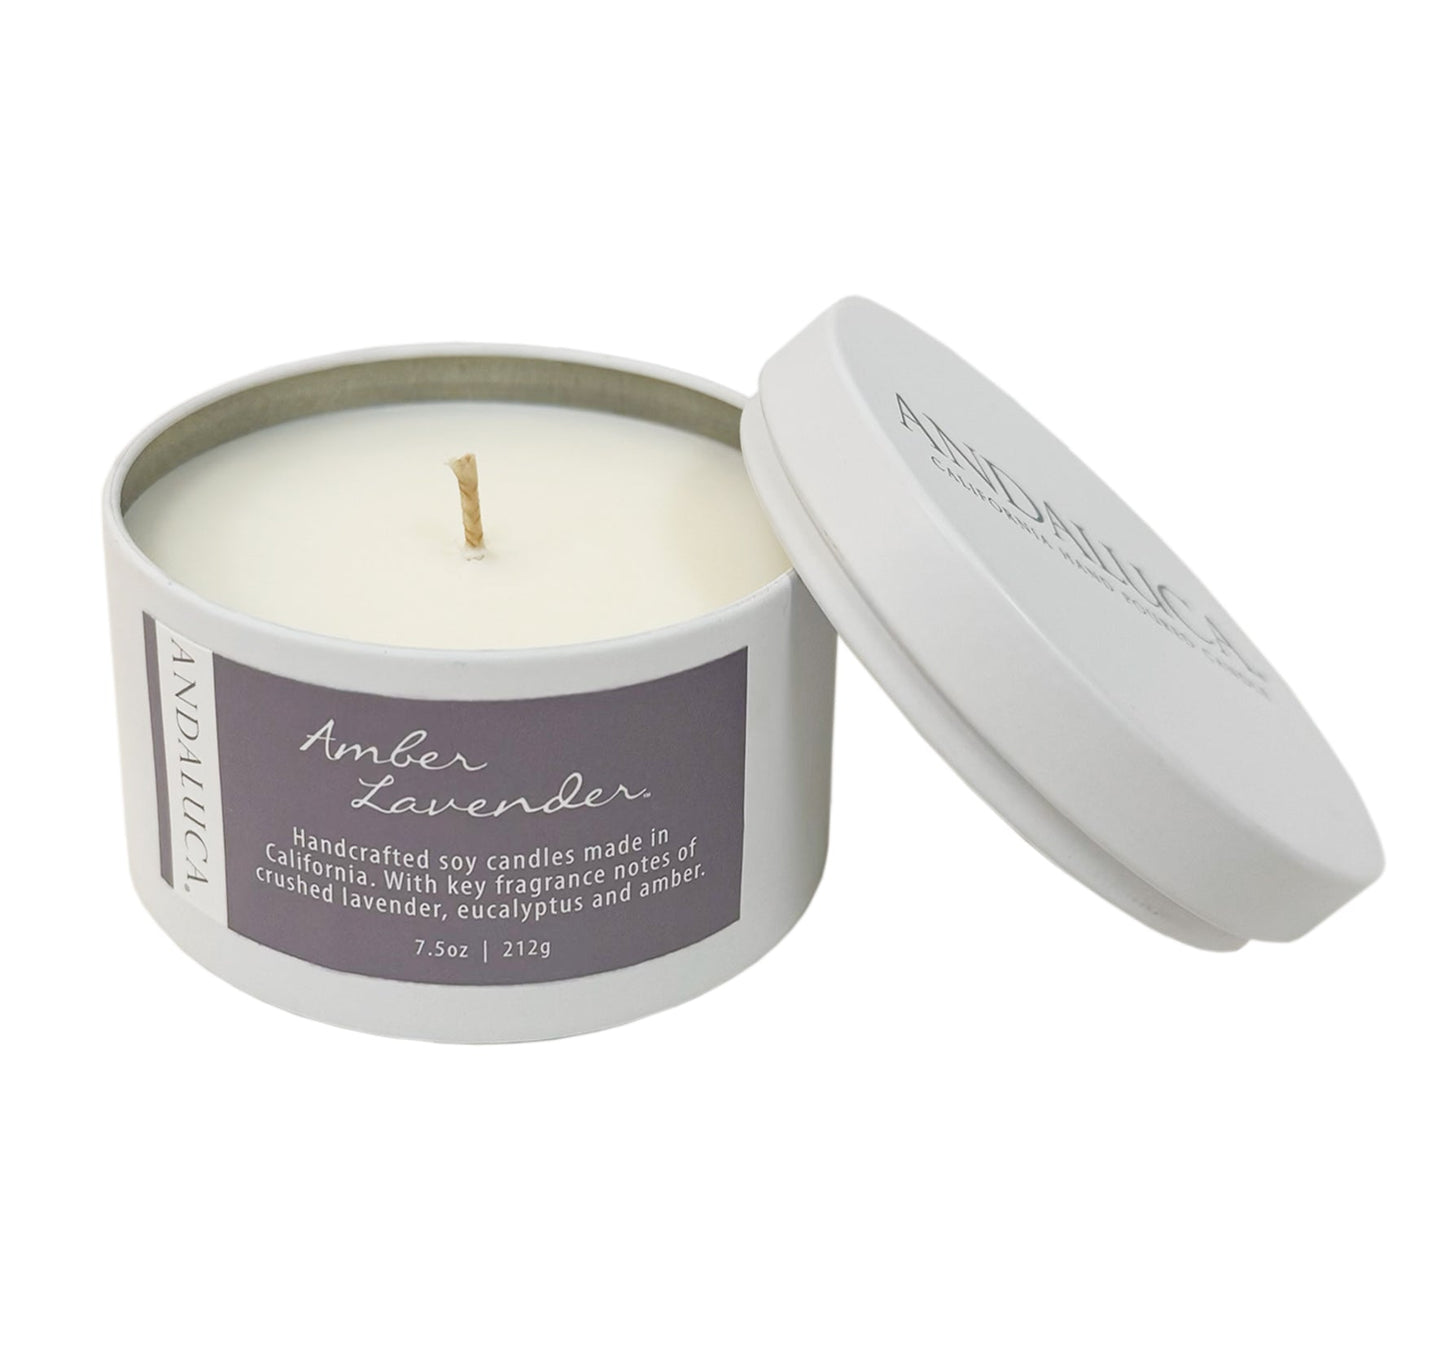 Amber Lavender Tin Candle